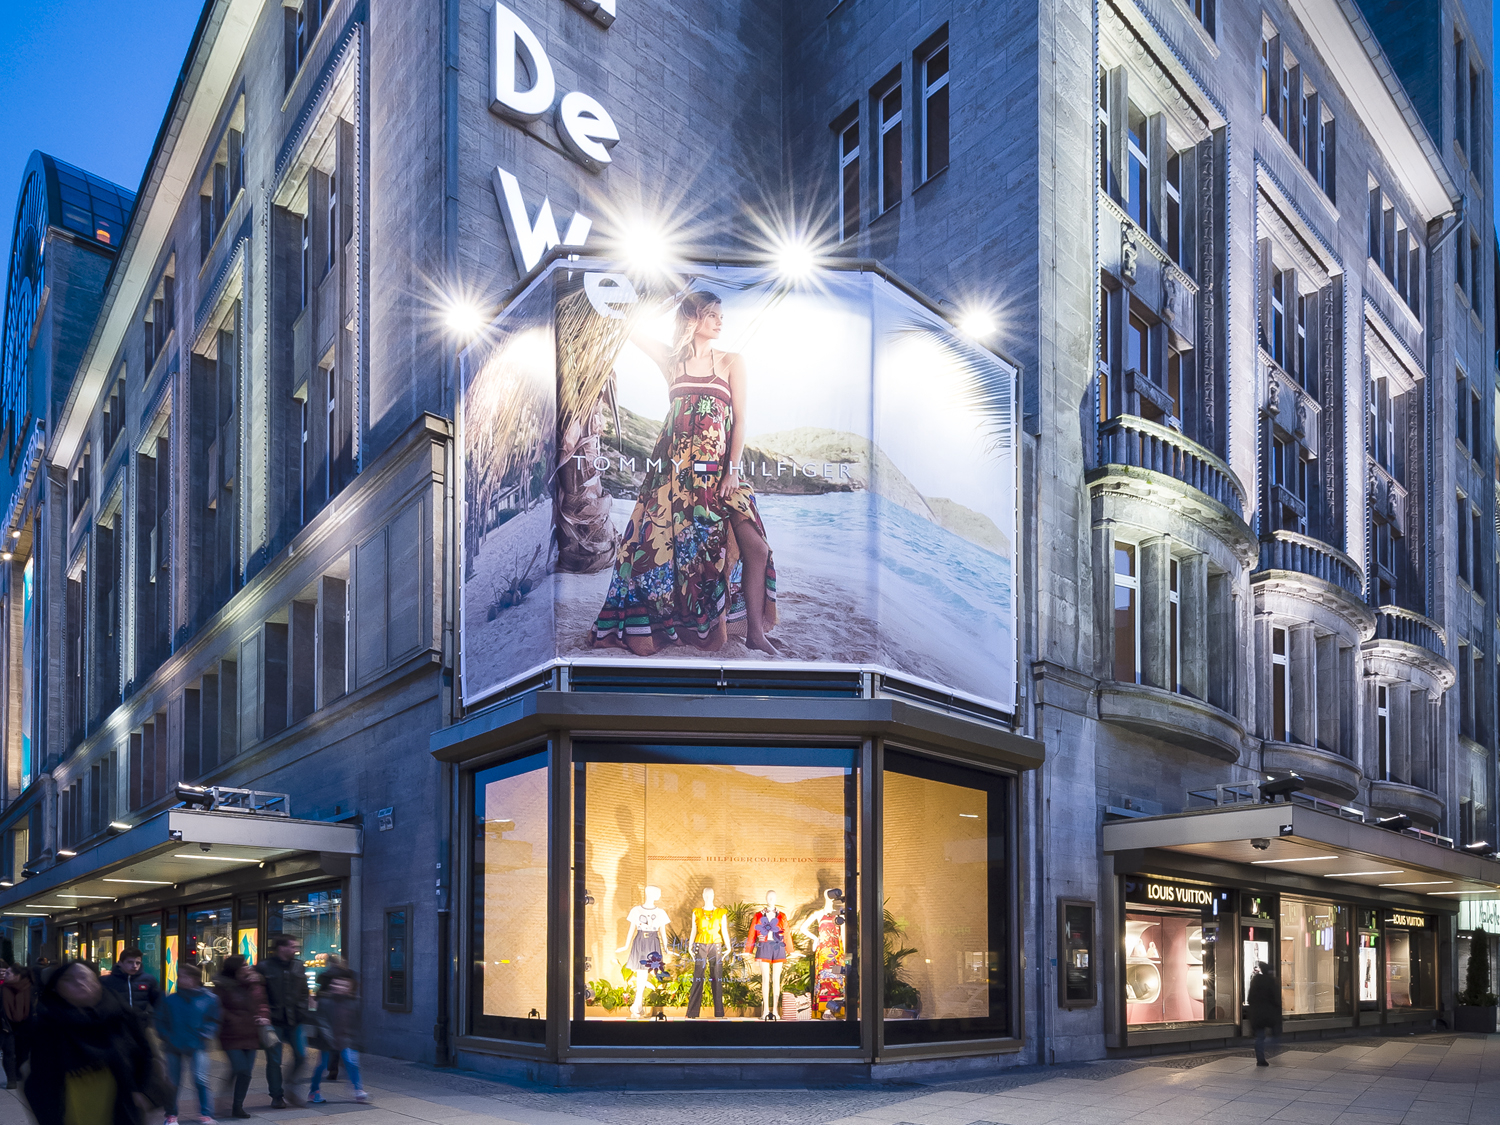 Dfrost, Tommy Hilfiger, Kadewe, Window campaign, PopUp, Collection, Brand Space, Retail, Island vibes, Summer